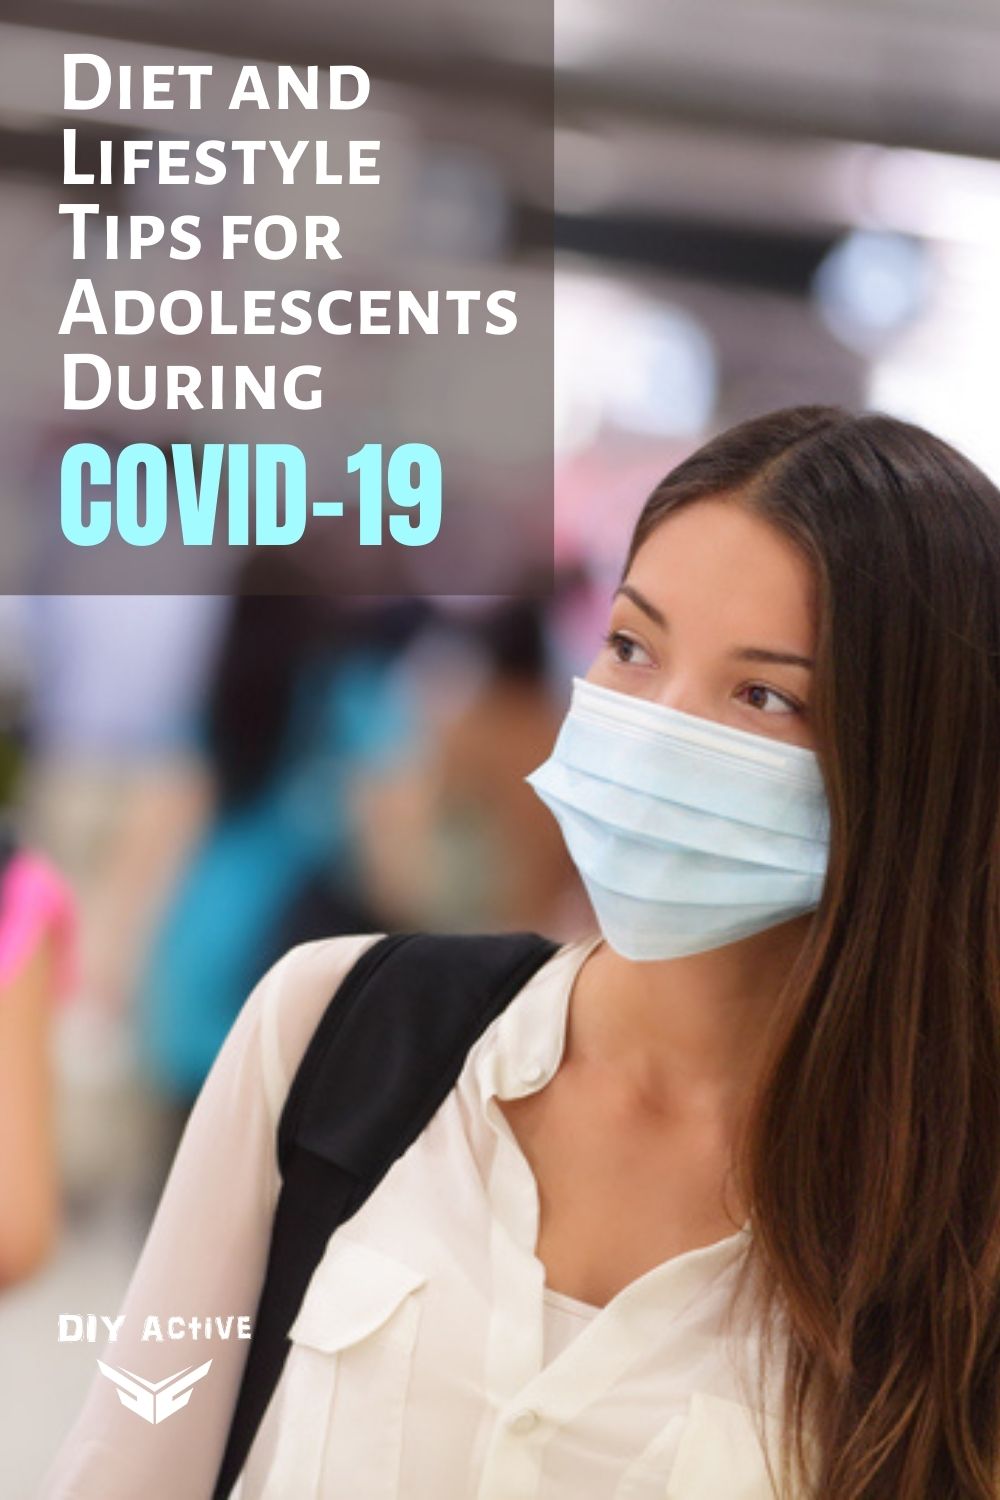 Diet and Lifestyle Tips for Adolescents During COVID-19